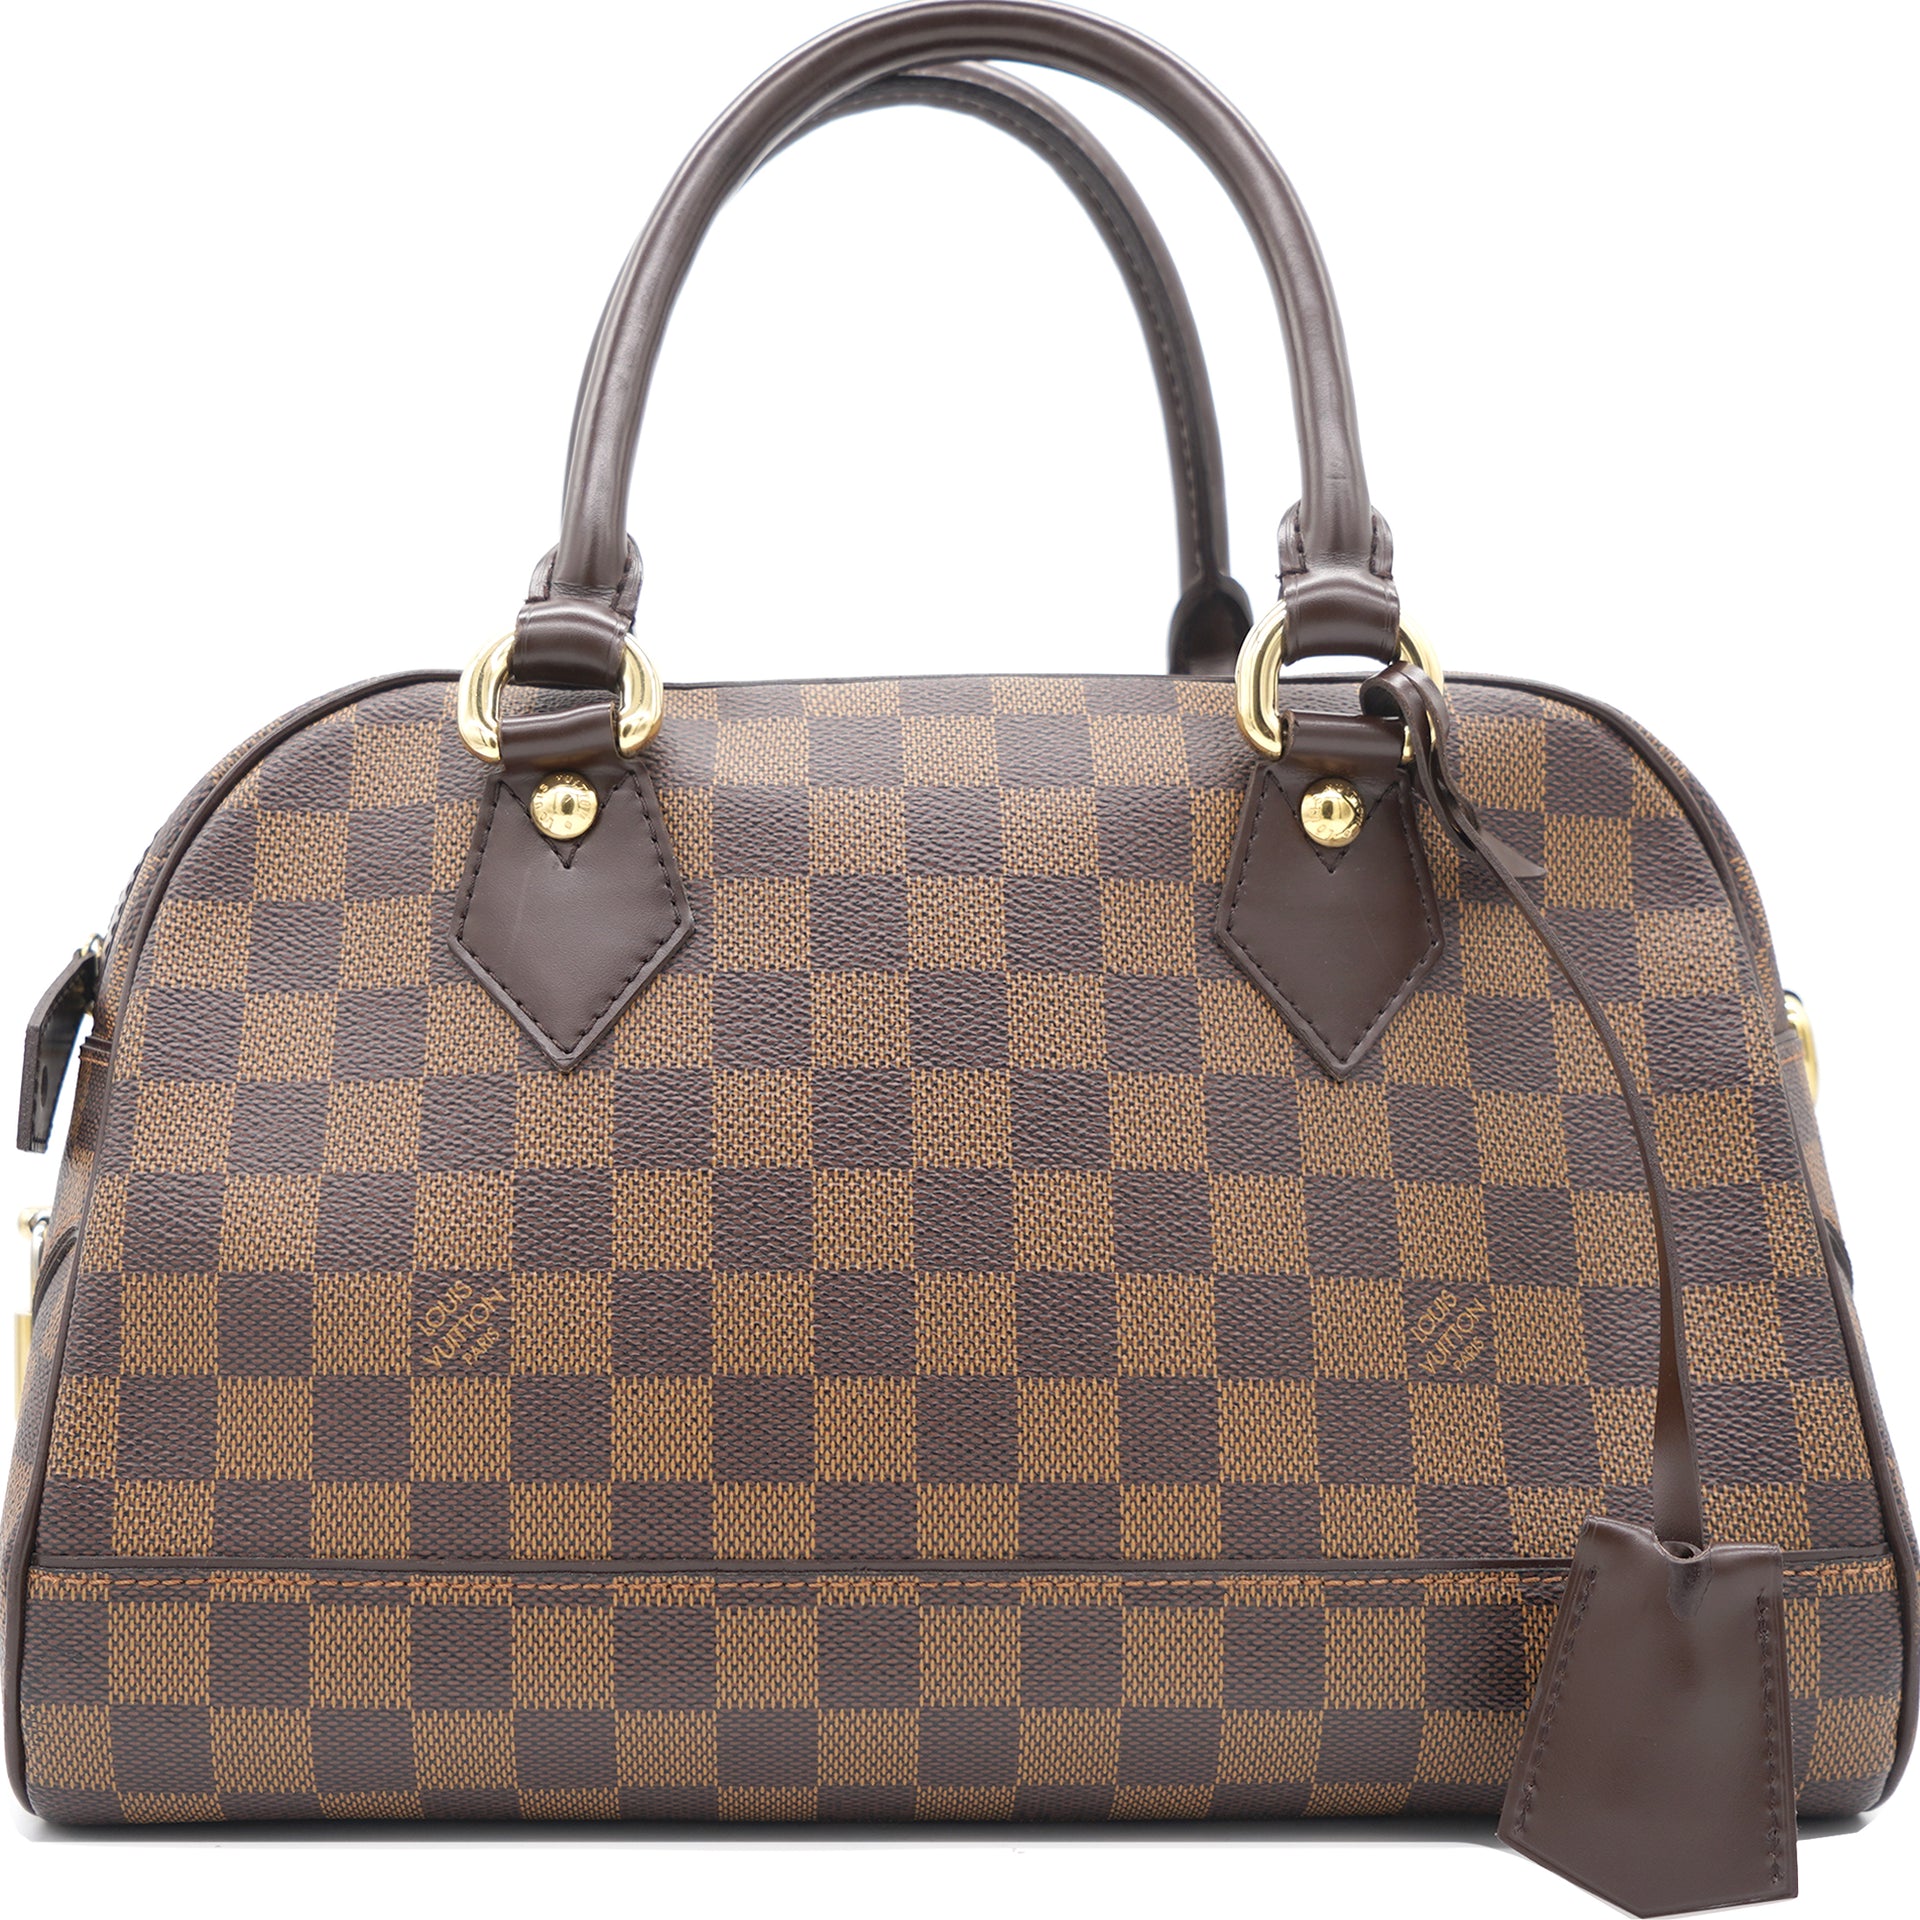 New Louis Vuitton Duomo is here~Check it out! 